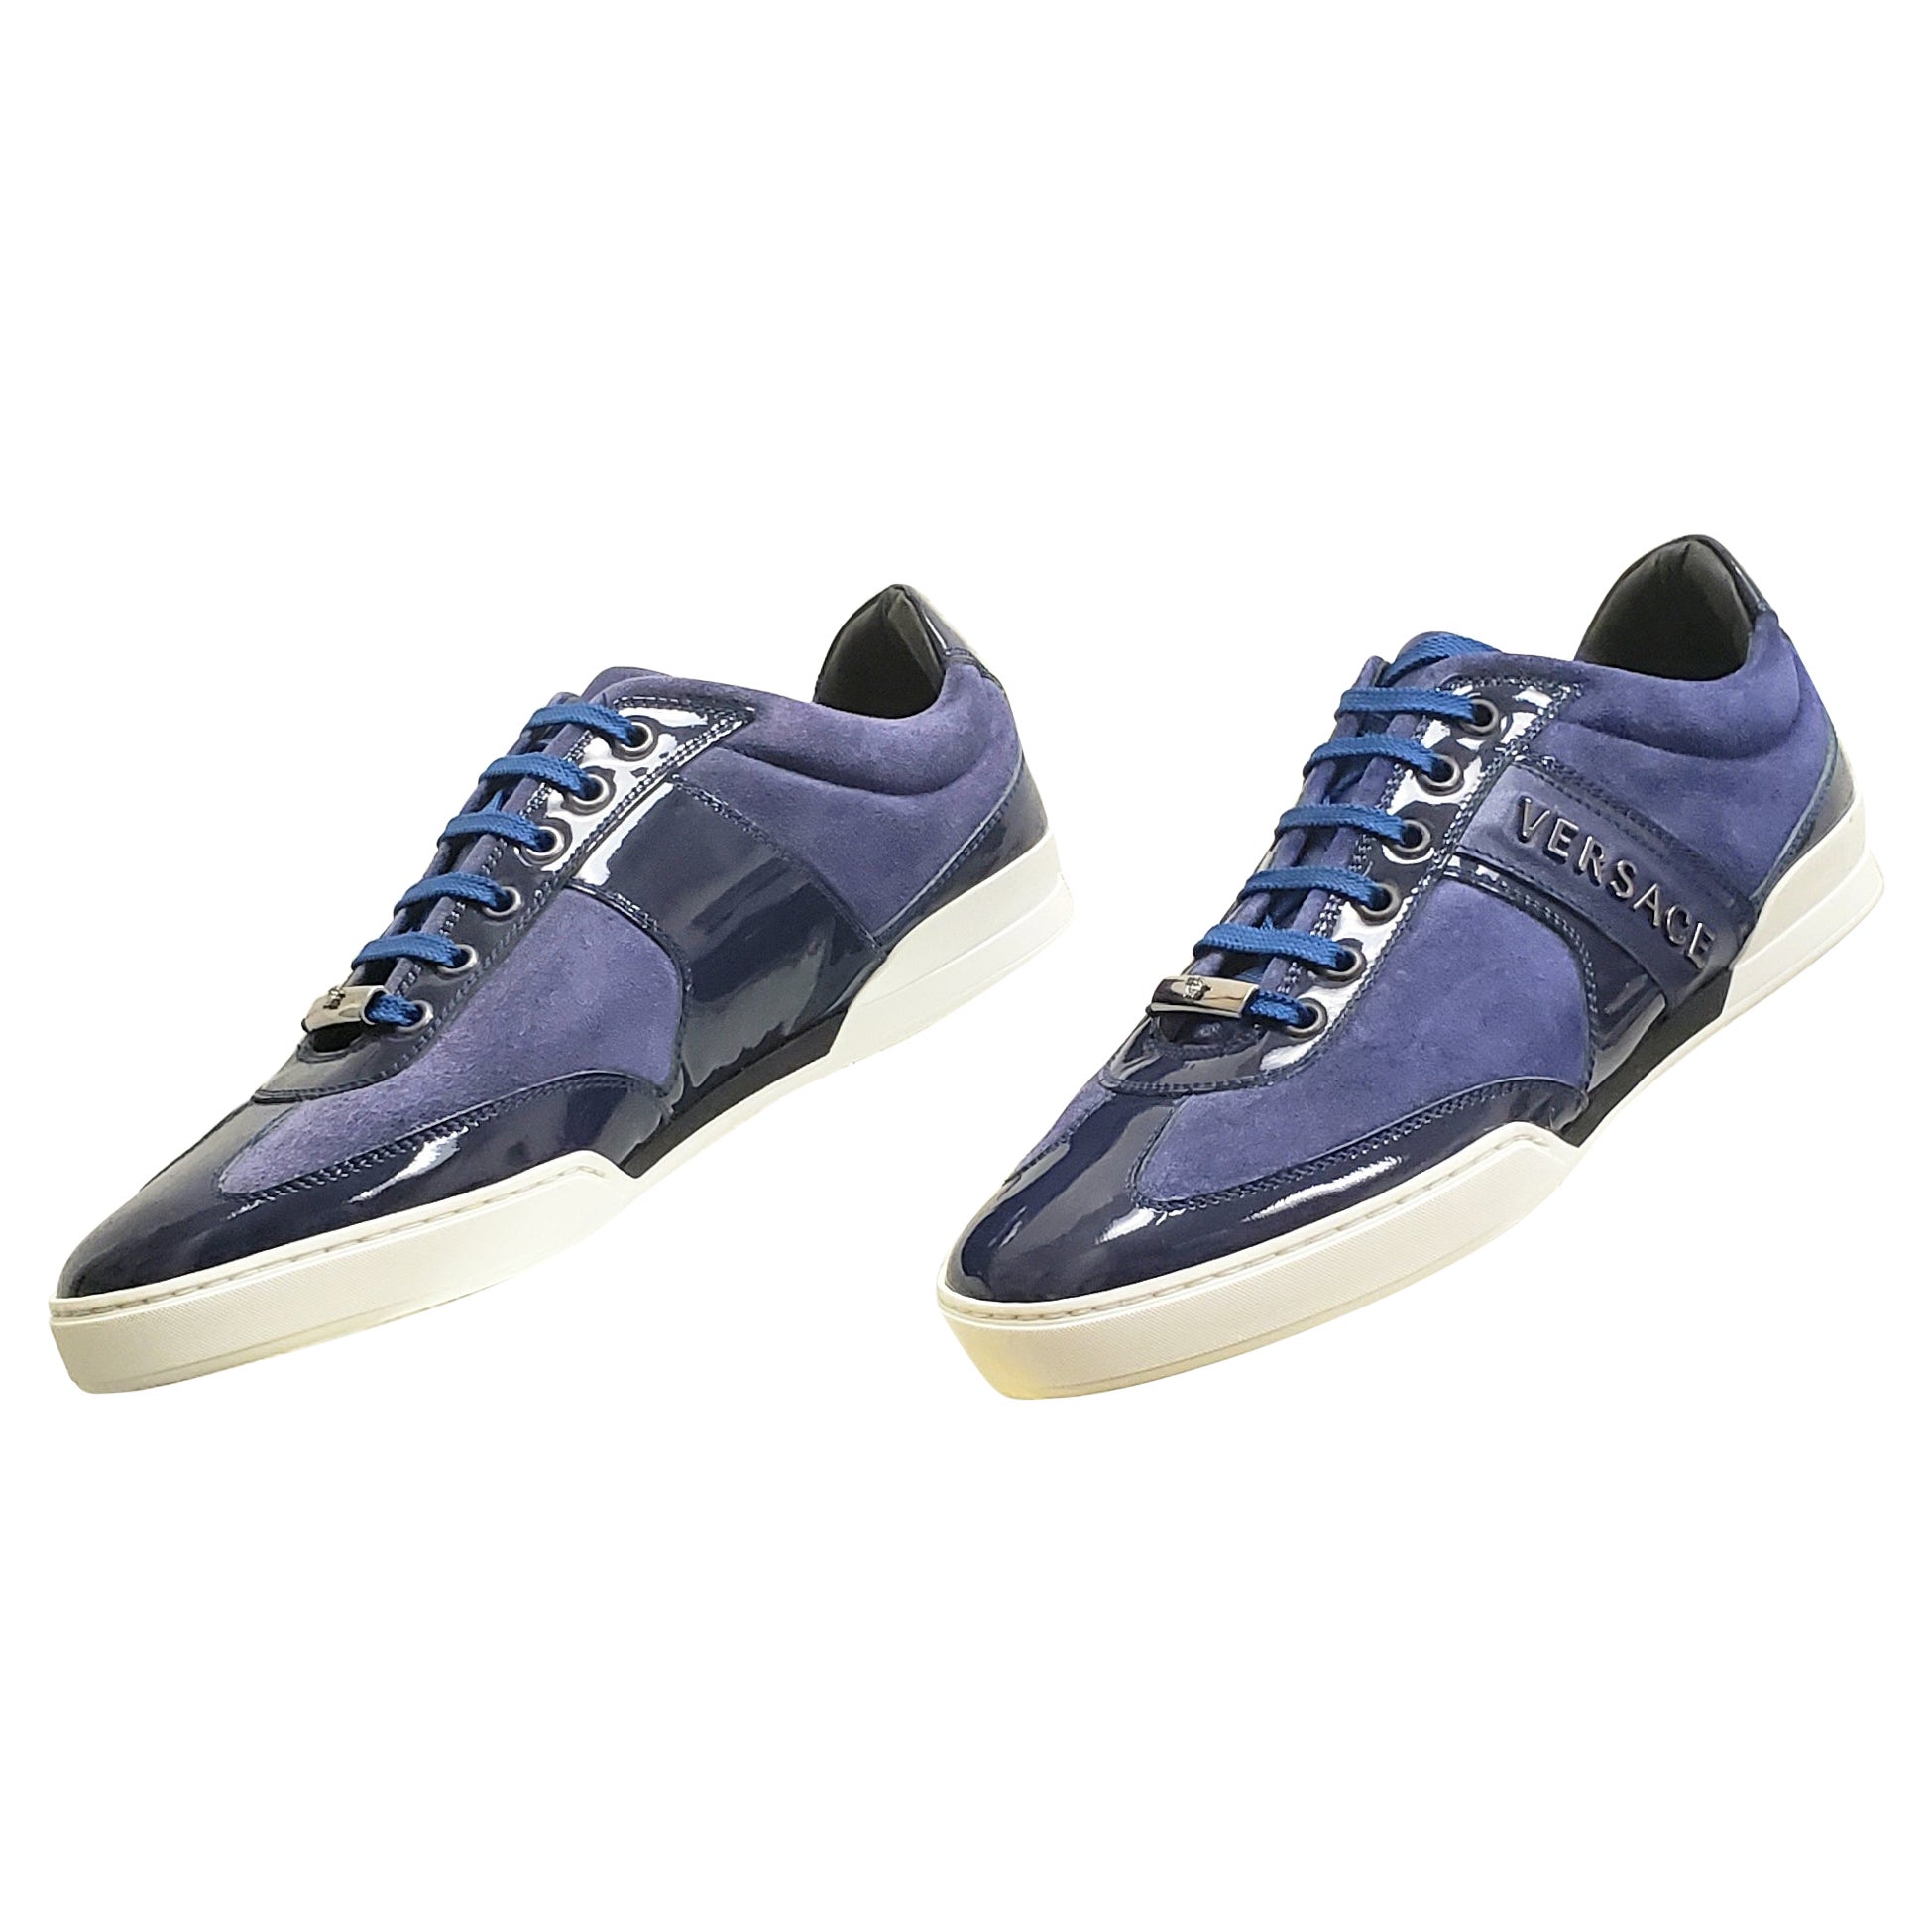 NEW DARK BLUE SUEDE LEATHER SNEAKERS w/PATENT LEATHER DETAILS 40 - 7 For Sale